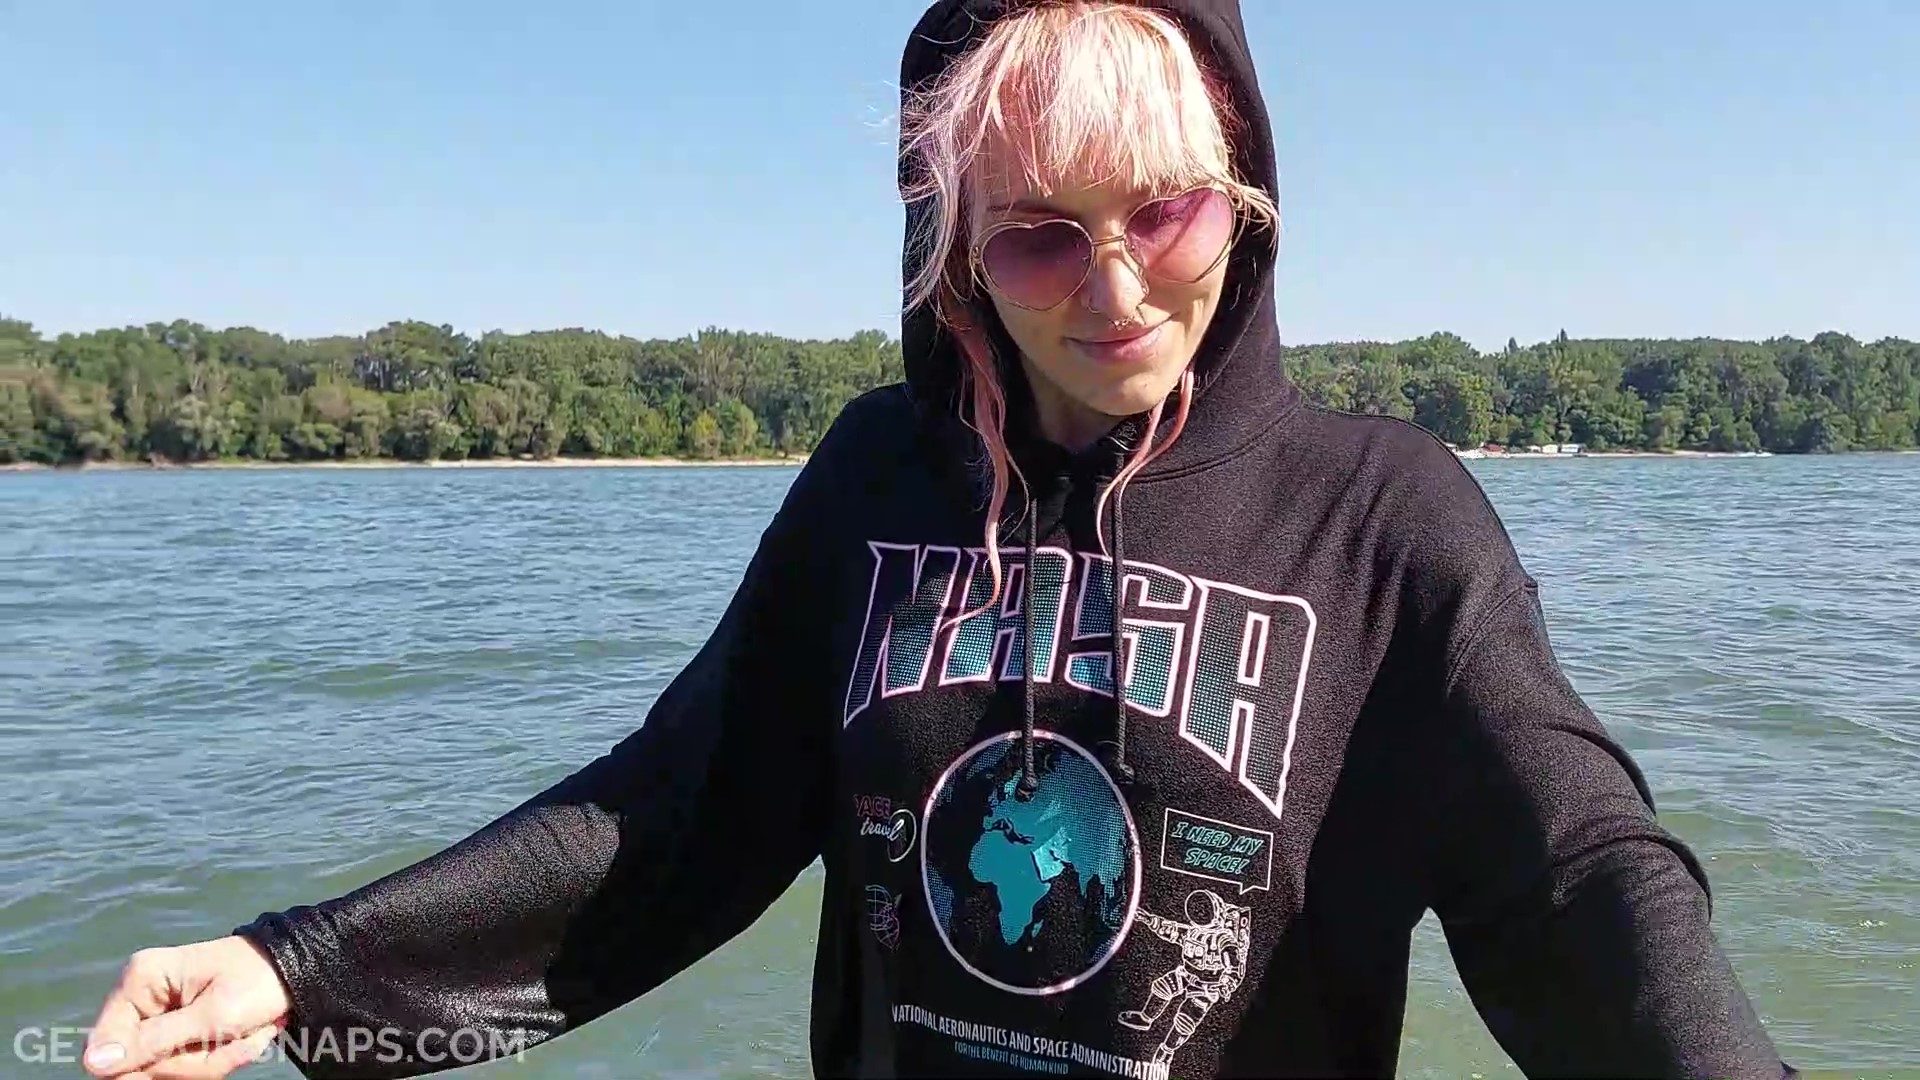 Pinkie takes a bath in the river in jeans, converse and hoodie - frame at 4m51s